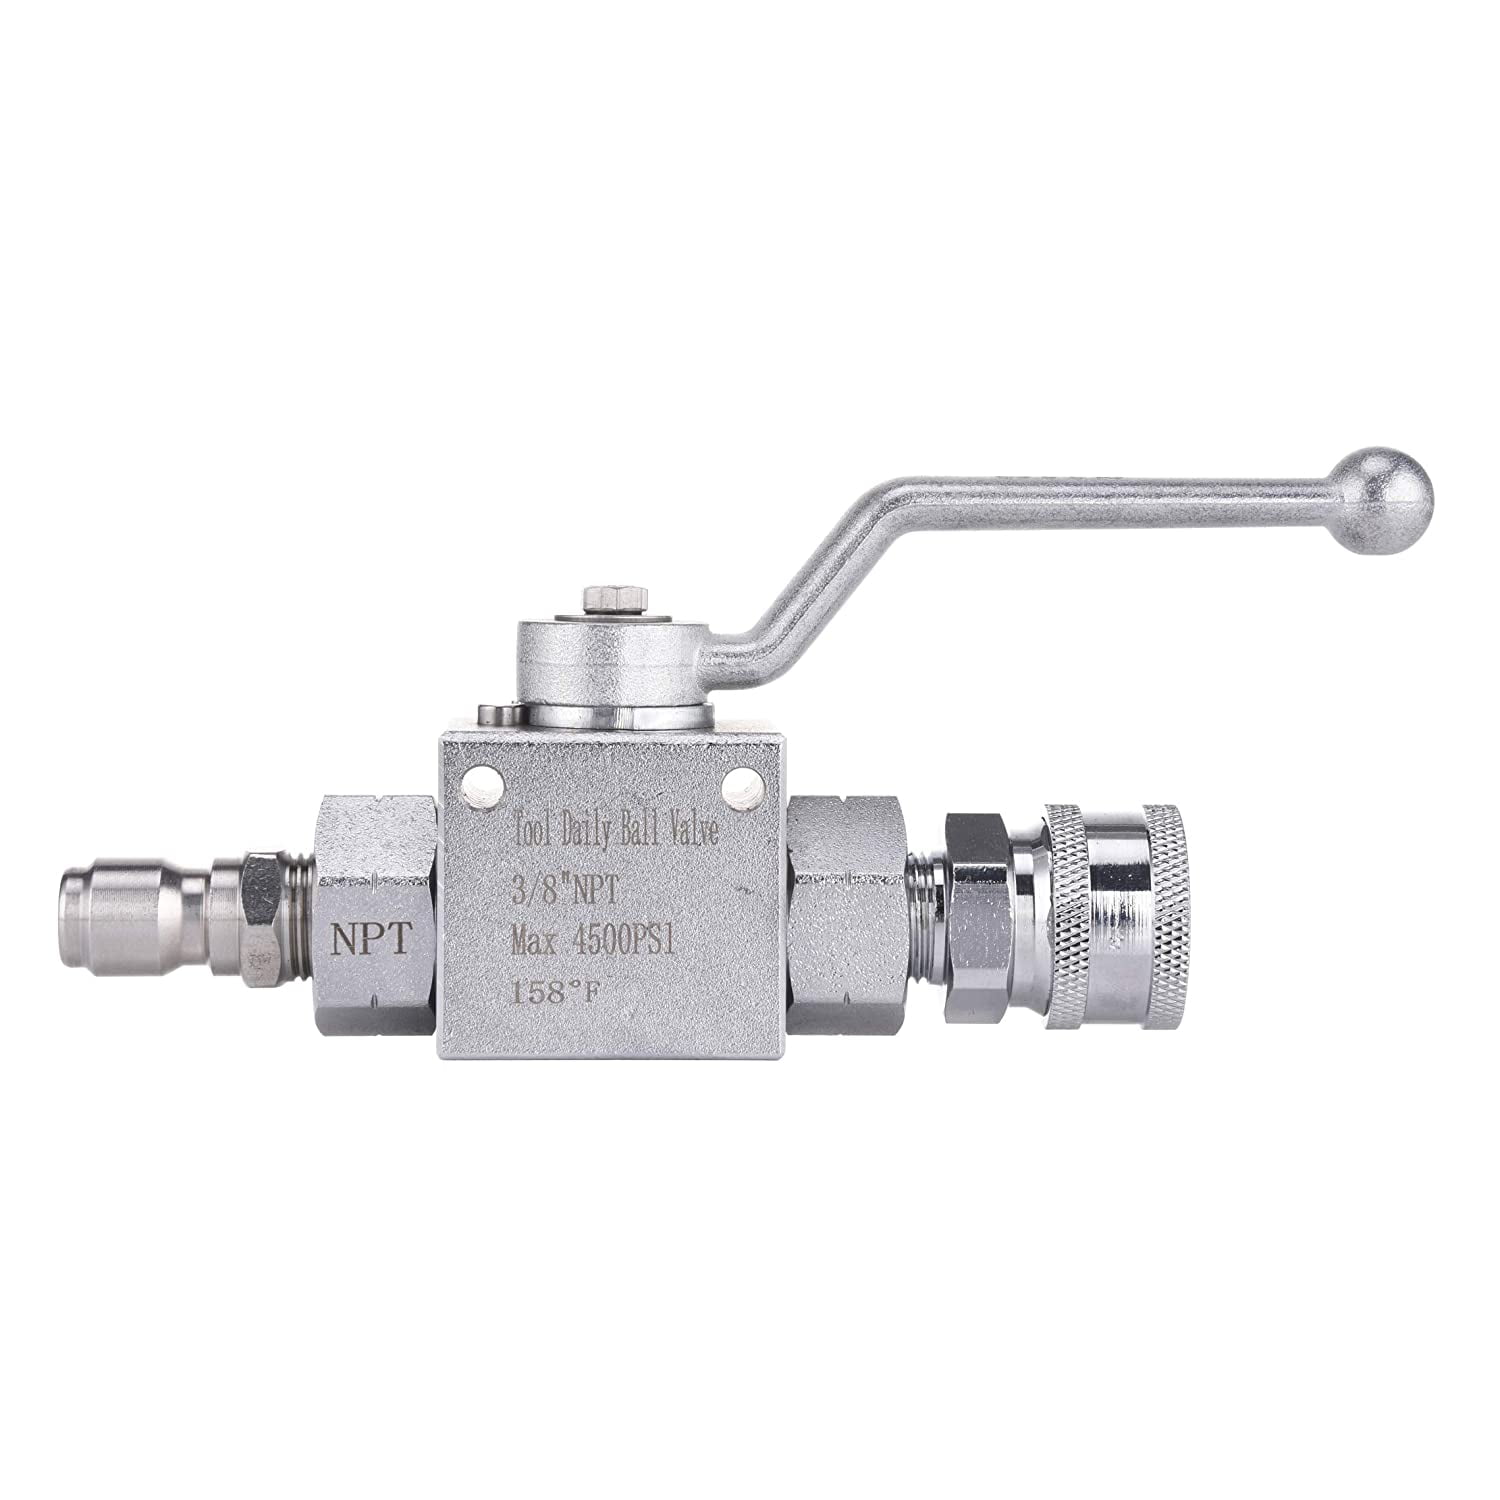 EDOU 4,500 PSI High Pressure Washer Ball Valve Kit 3/8 Male Plug X 3/8 Female Quick Connect for High Pressure Washer Hoses,Including Replacement Quick Connector and Teflon Tape 